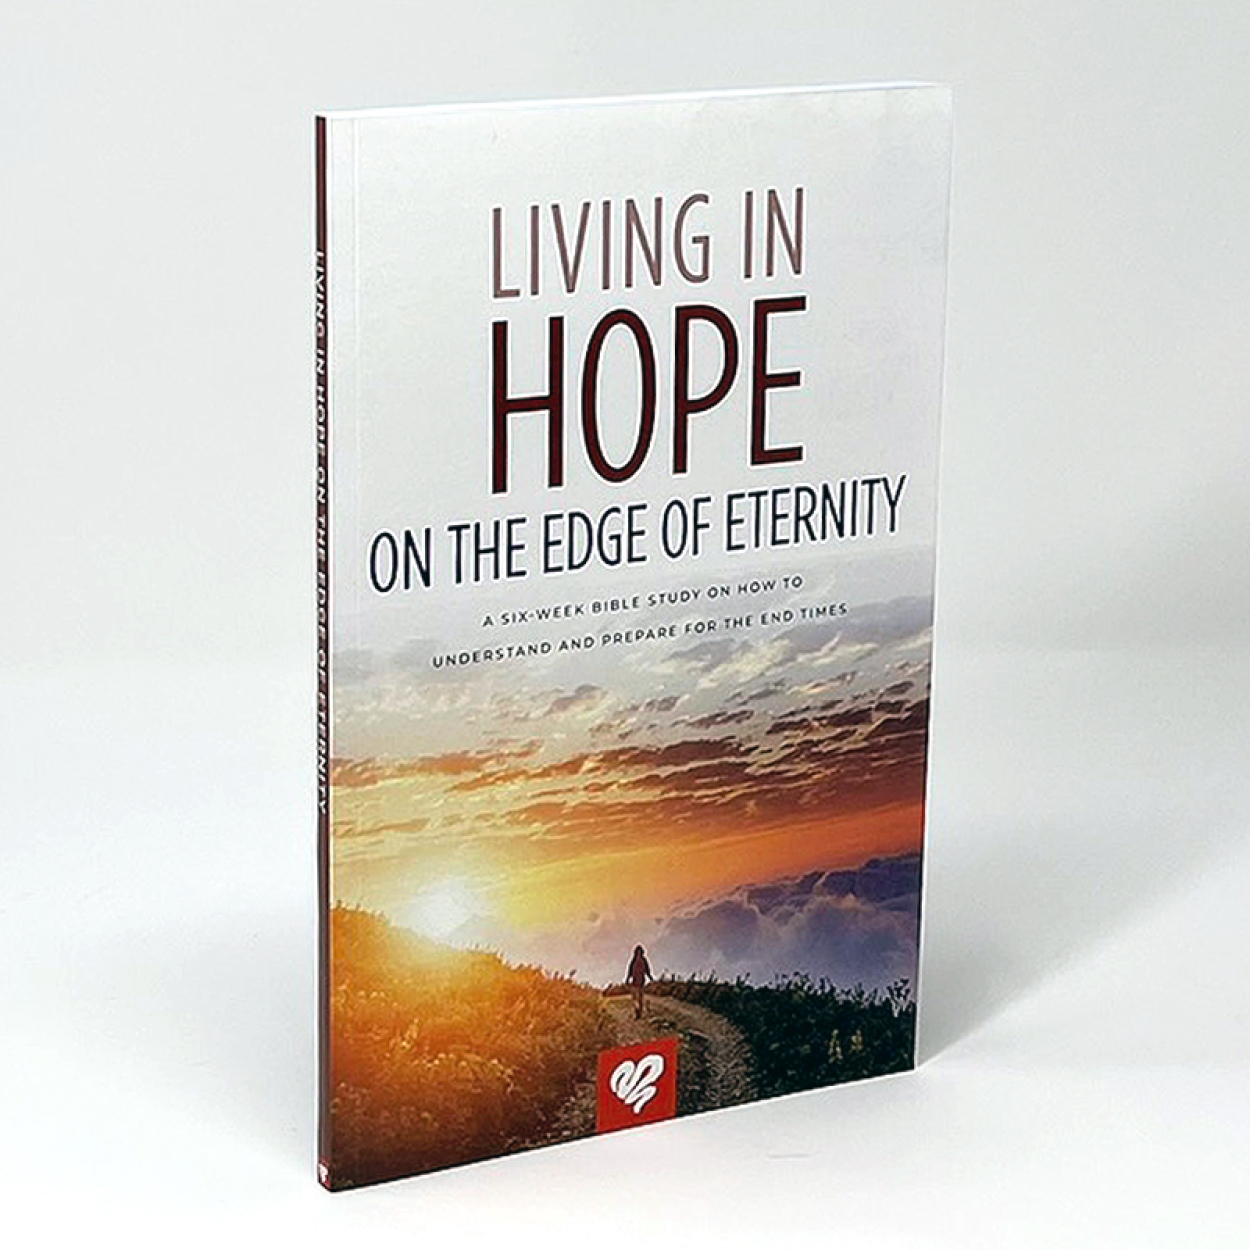 Bss157 living in hope on the edge of eternity bible study STORE GRID